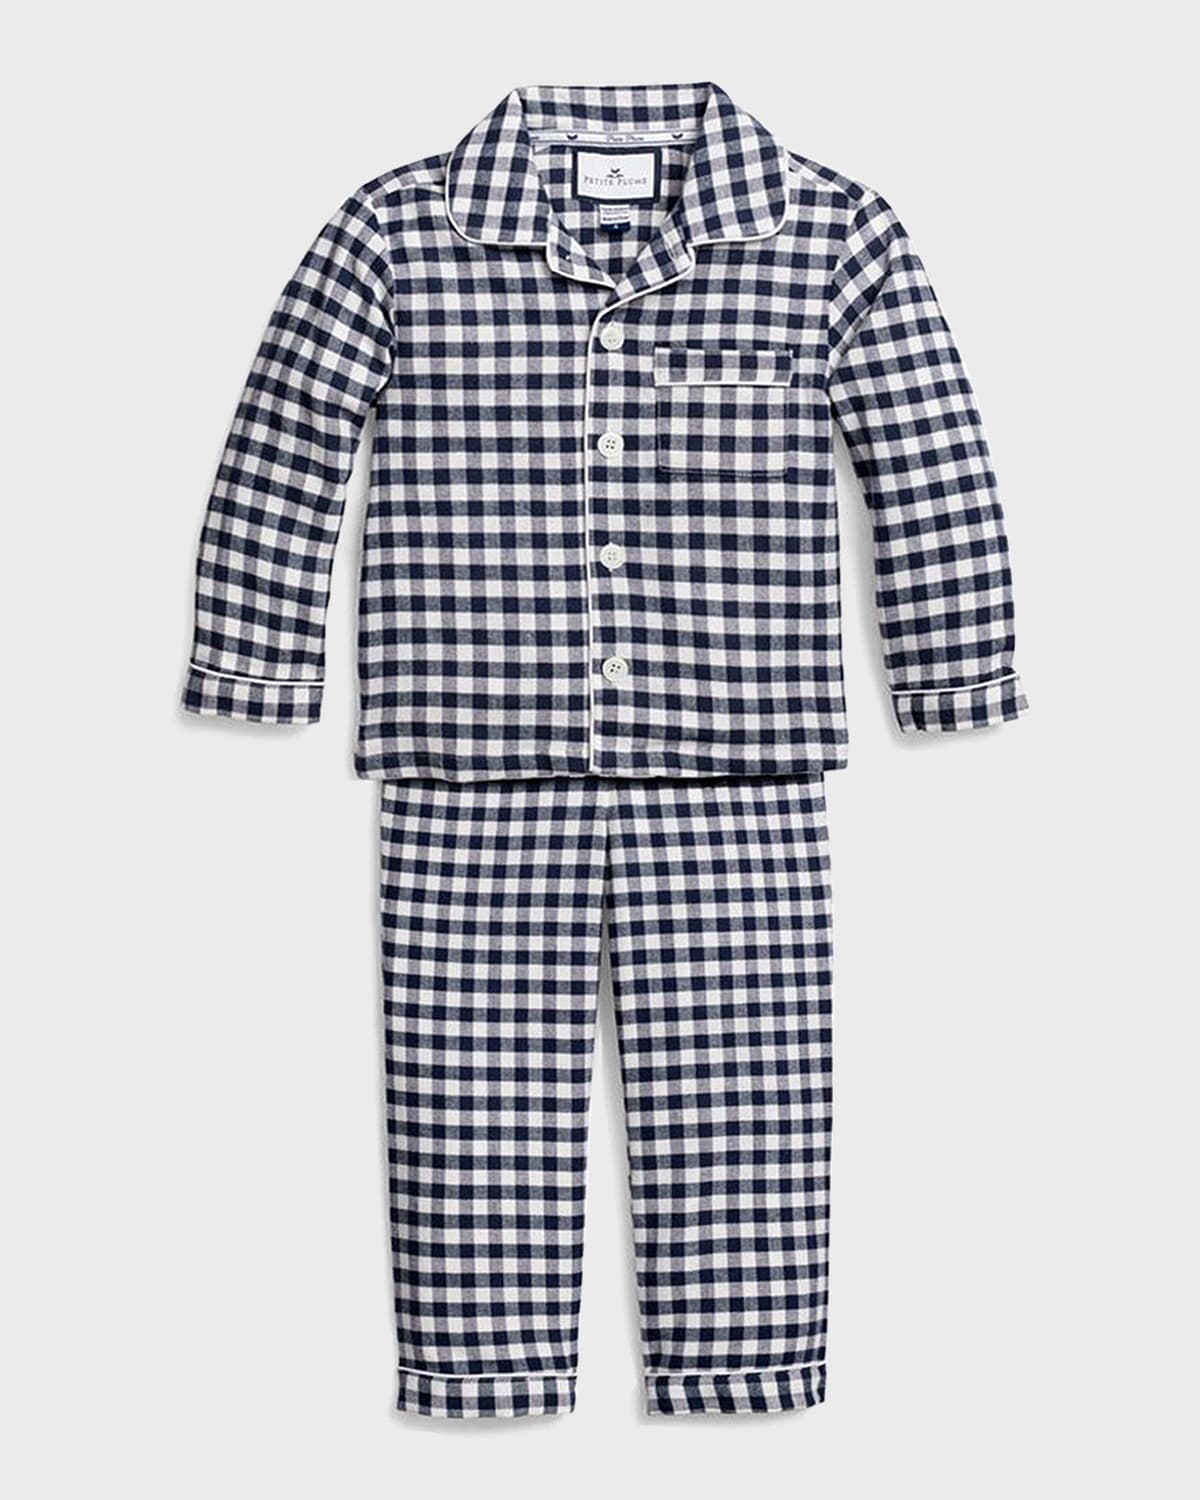 Petite Plume Boy's French Ticking Striped Pajama Set w/ Contrast Piping ...